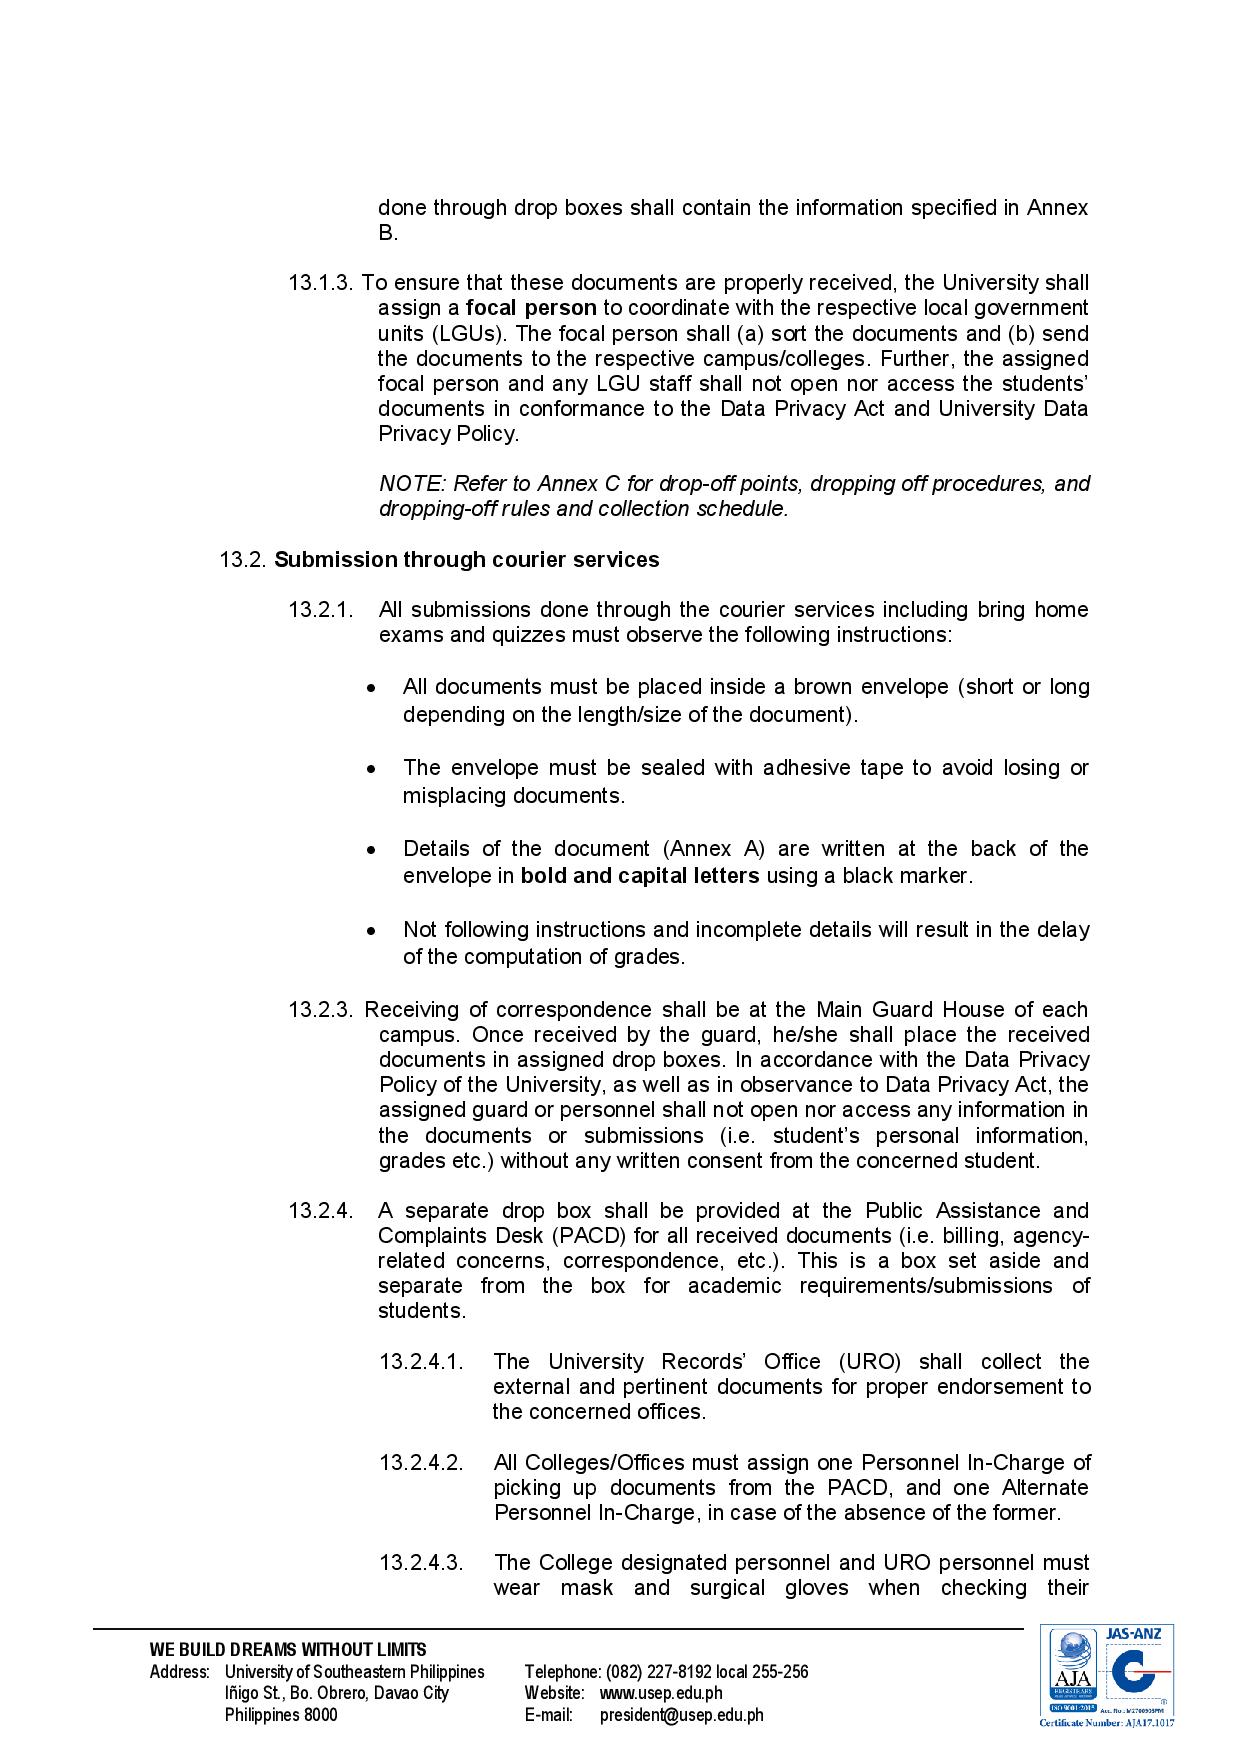 mc-03-s-2020-memorandum-circular-on-administrative-guidelines-upon-resumption-of-work-and-conduct-of-classes-under-the-new-normal-condition-1-page-012